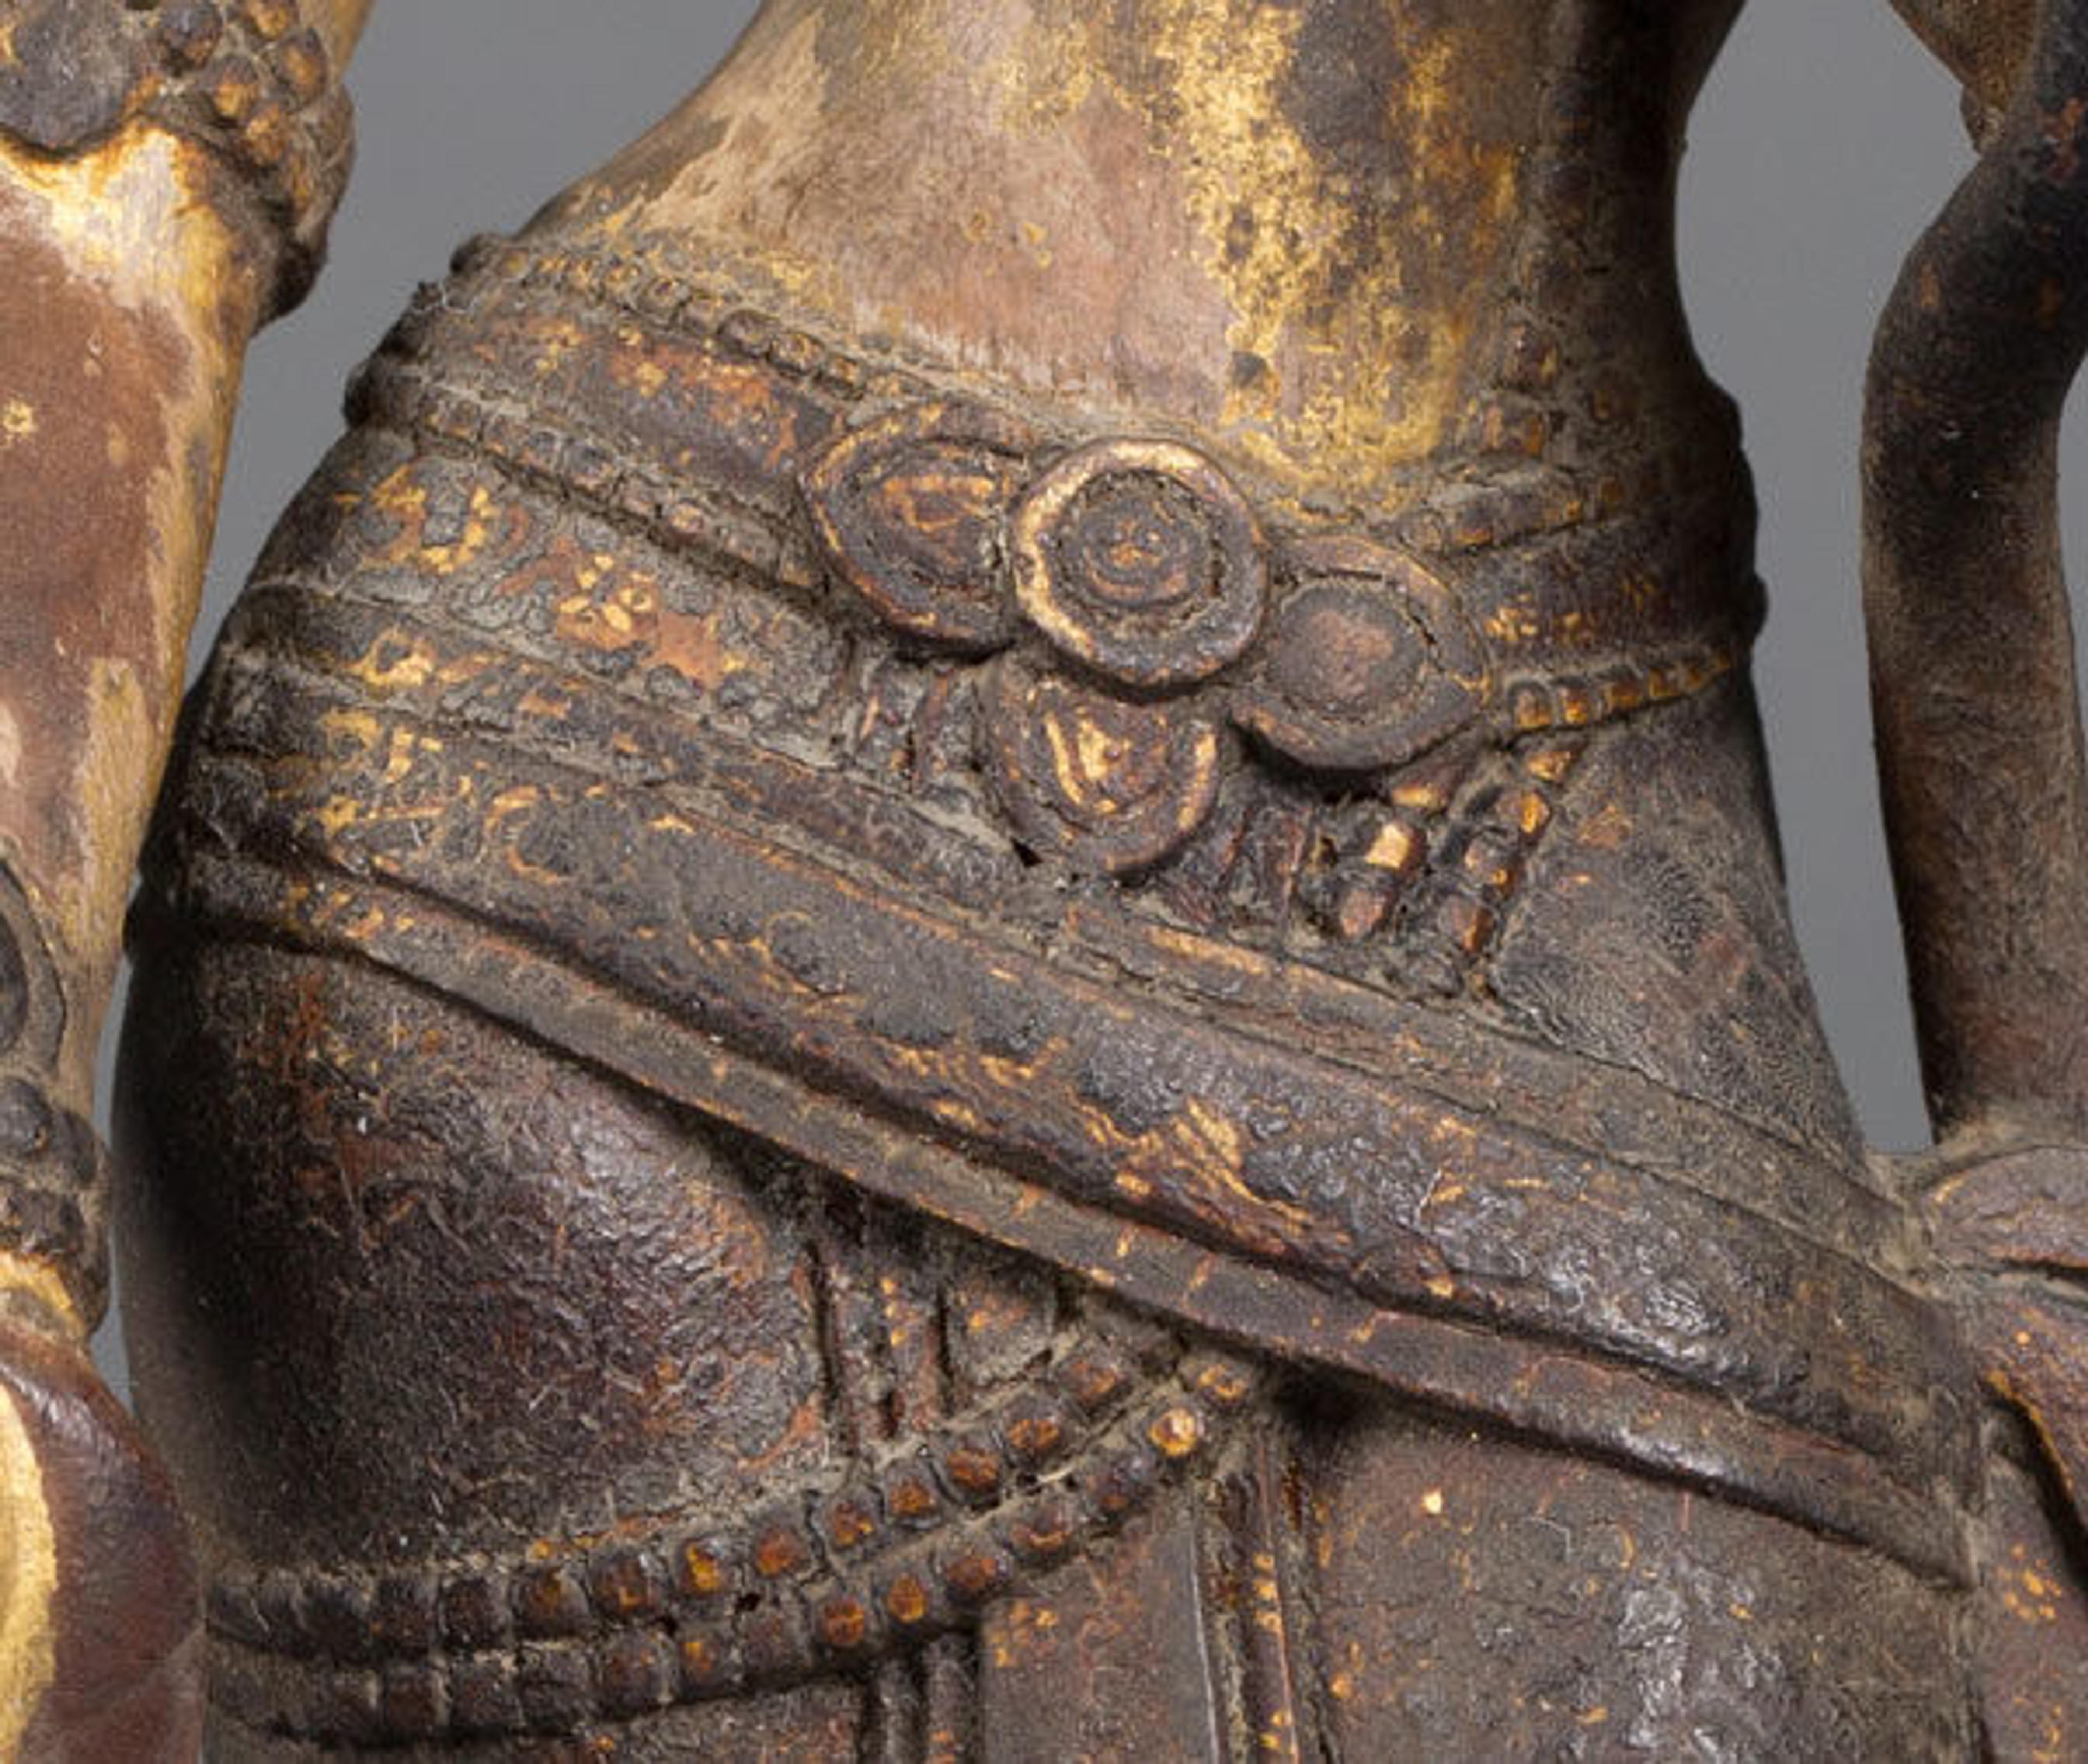 Detail of garment showing the degraded varnish (brown opaque crust) concealing the fine gilded details